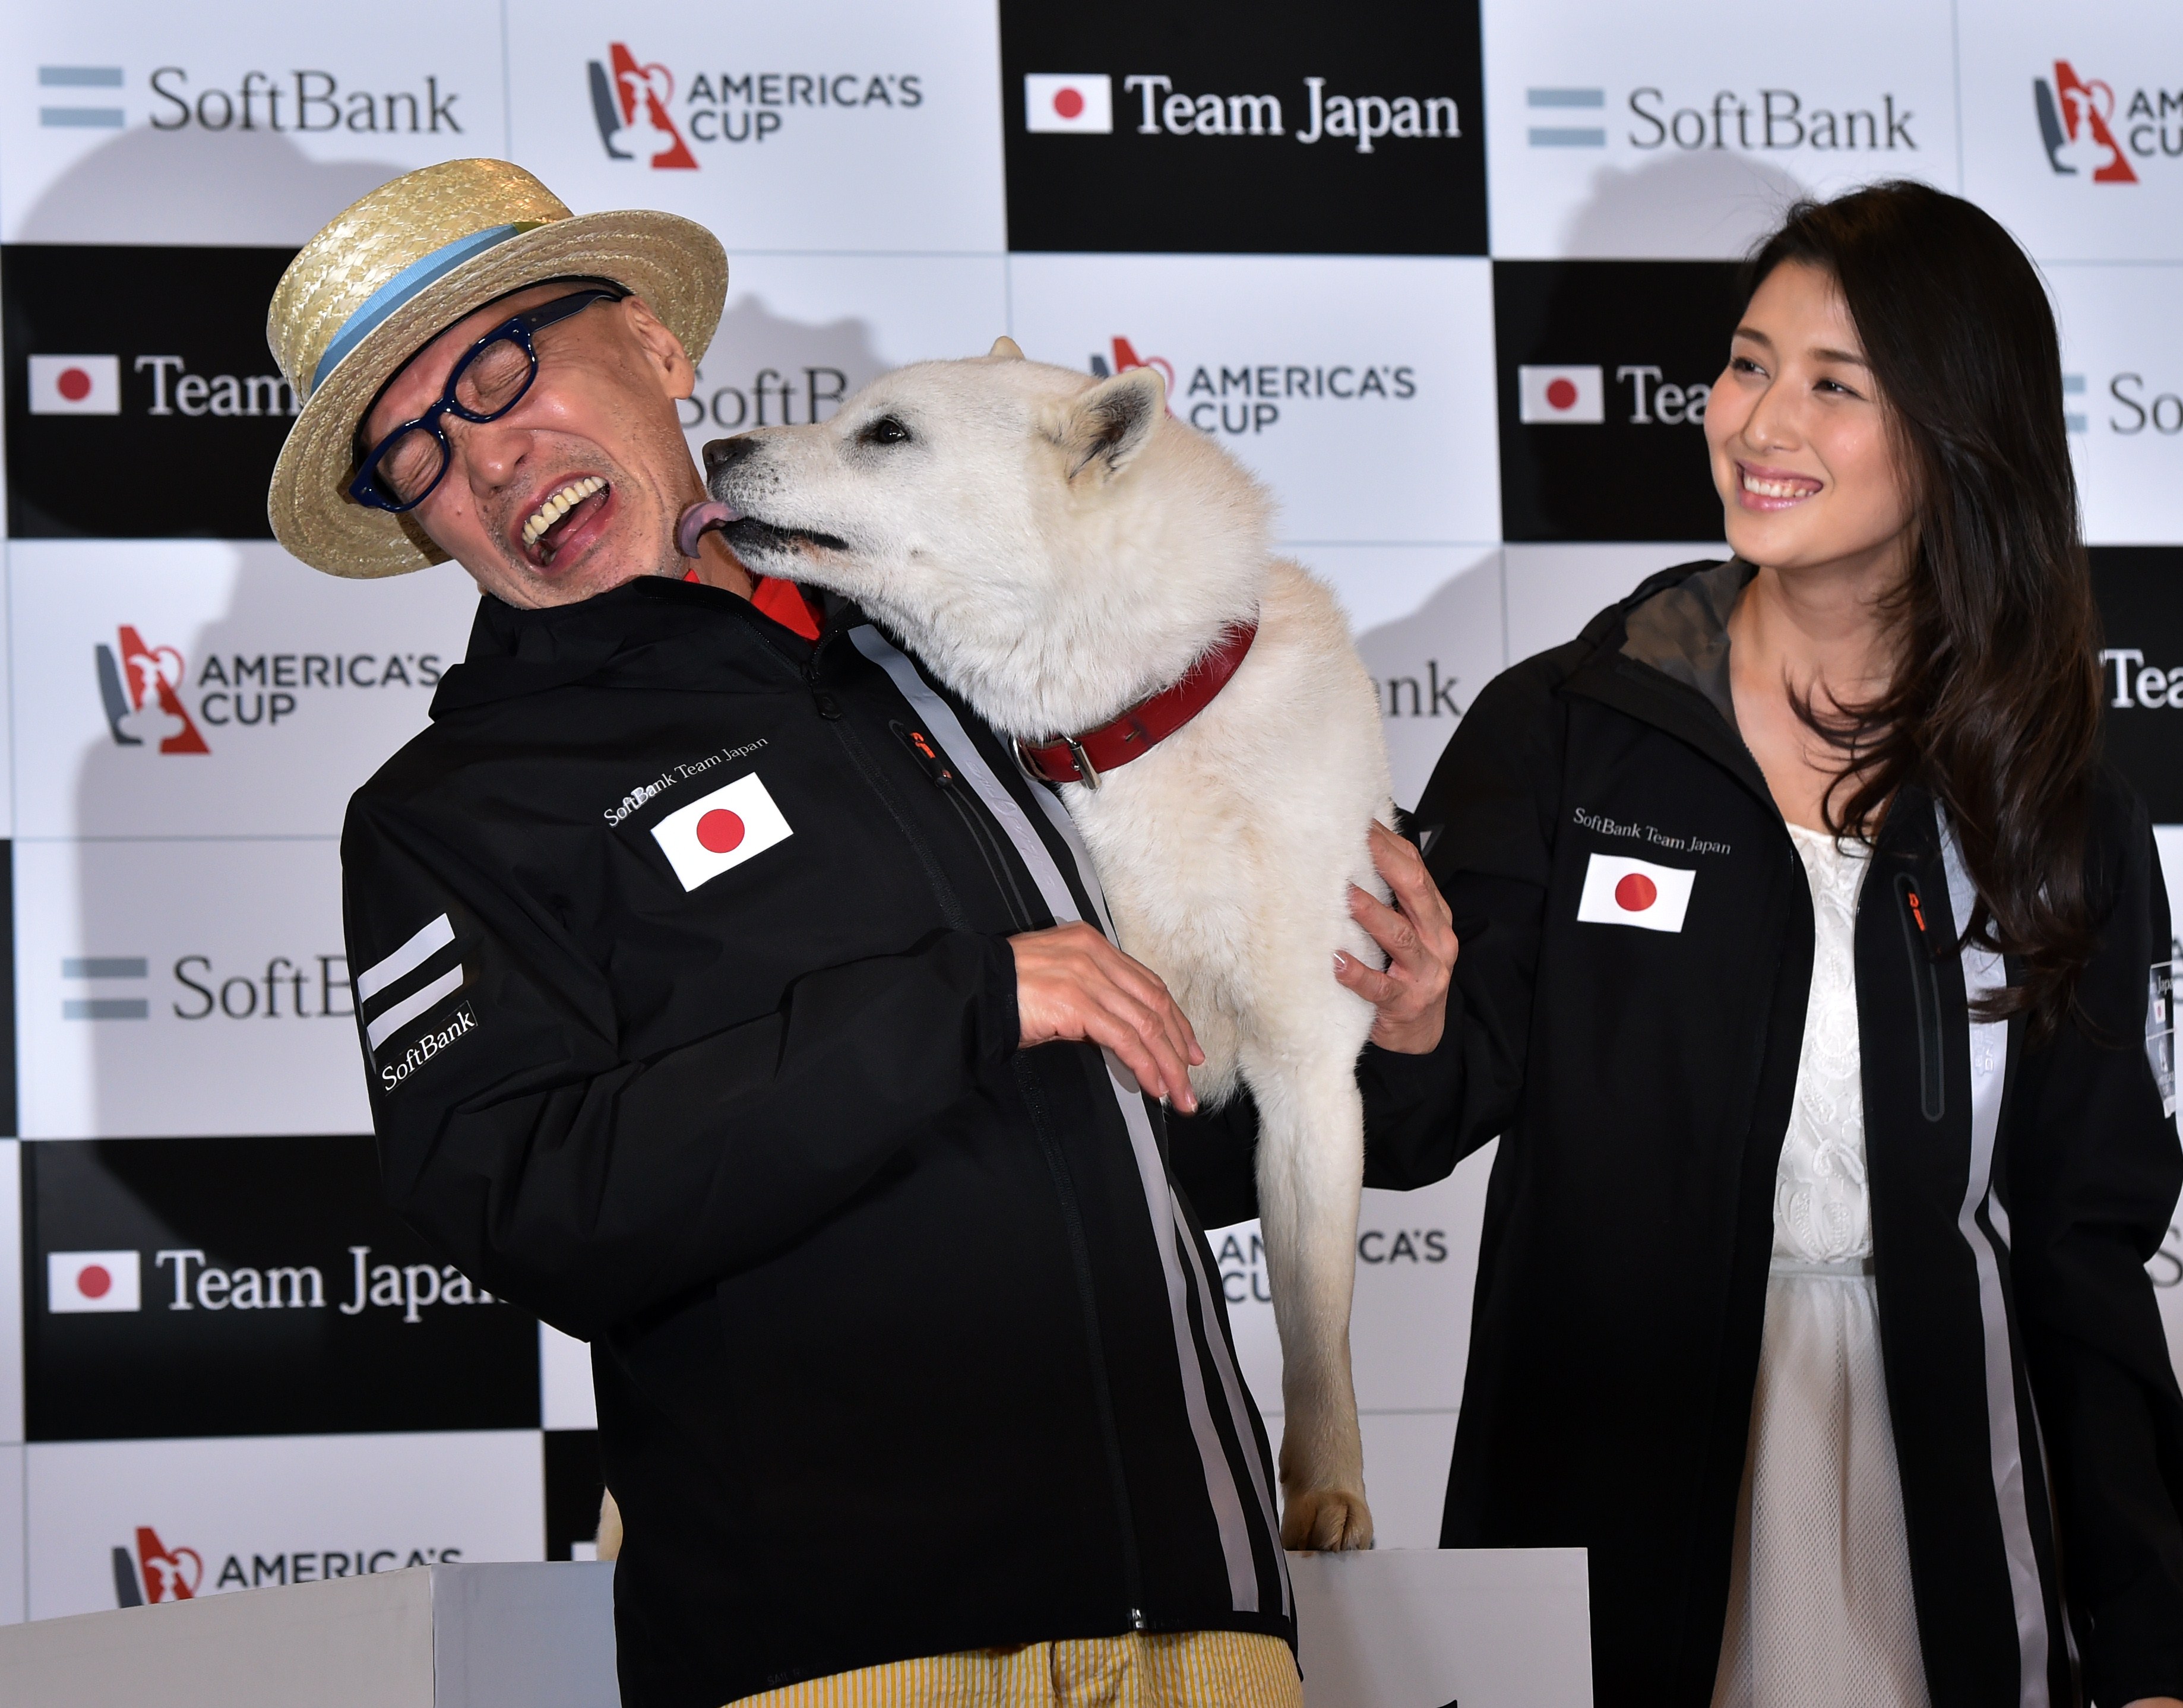 TV commentator Terry Ito is licked by SoftBank’s dog mascot.